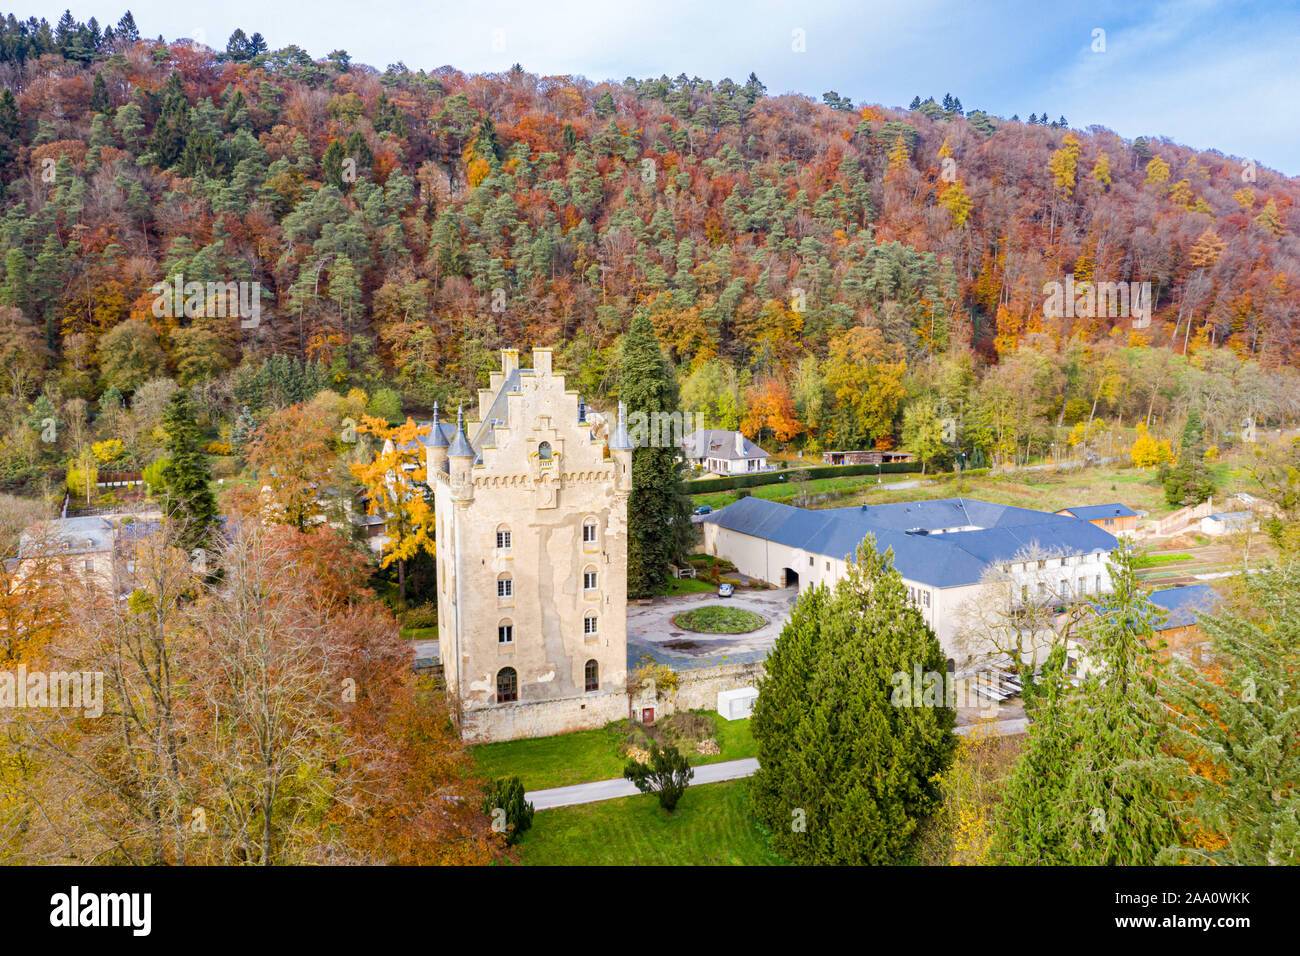 Tower of Schoenfels Castle, Mersch, Kopstal, Mamer or Valley of the Seven Castles in central Luxembourg. Fall in Luxembourg, hills covered with forest Stock Photo